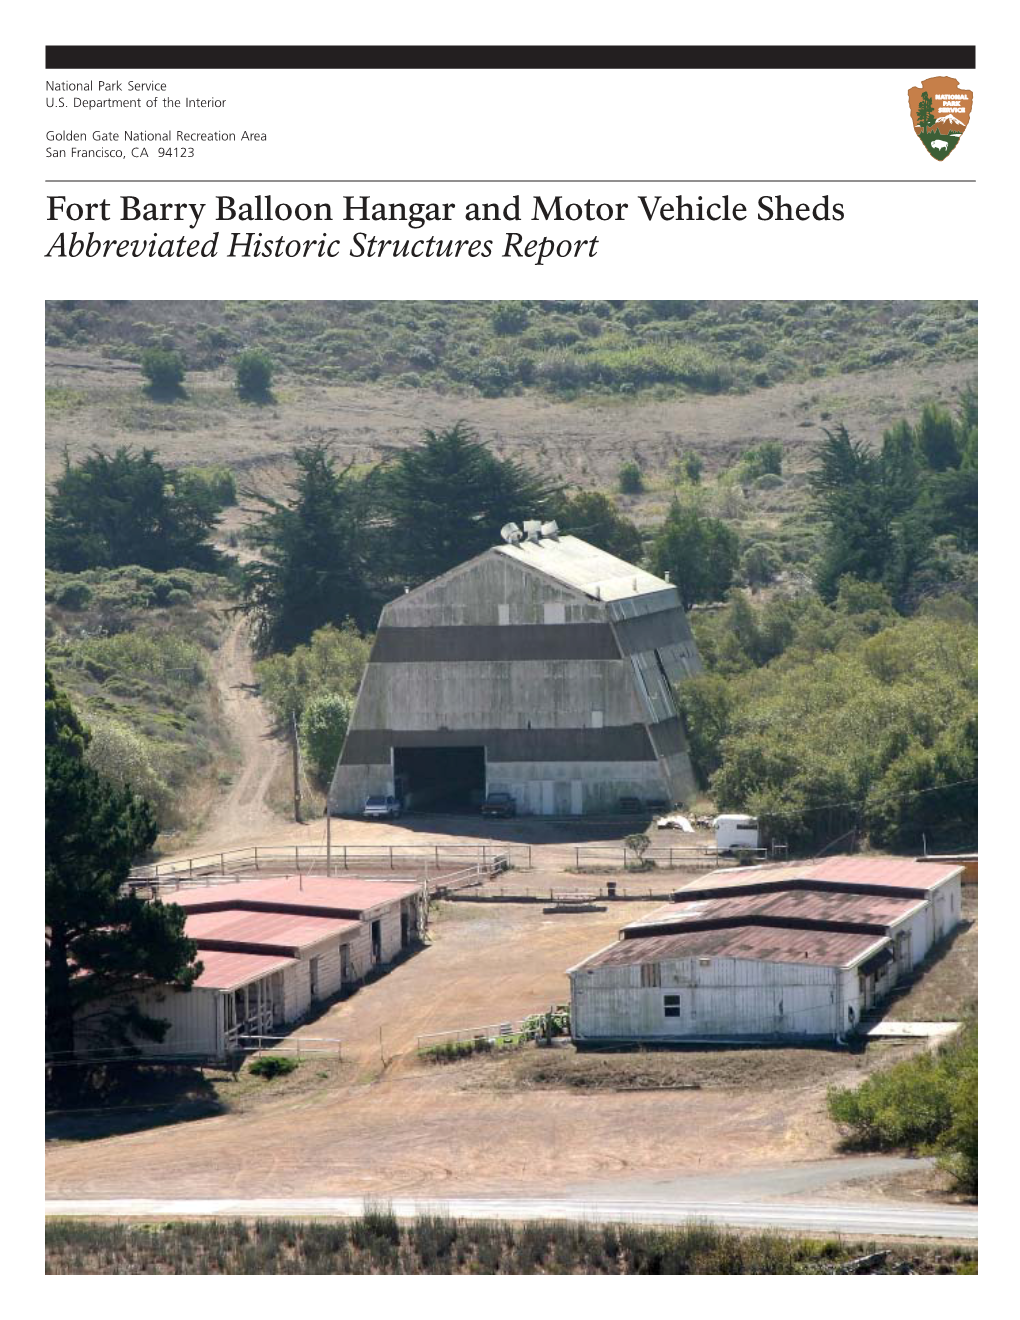 Fort Barry Balloon Hangar and Motor Vehicle Sheds Abbreviated Historic Structures Report Fort Barry Balloon Hangar, 1939